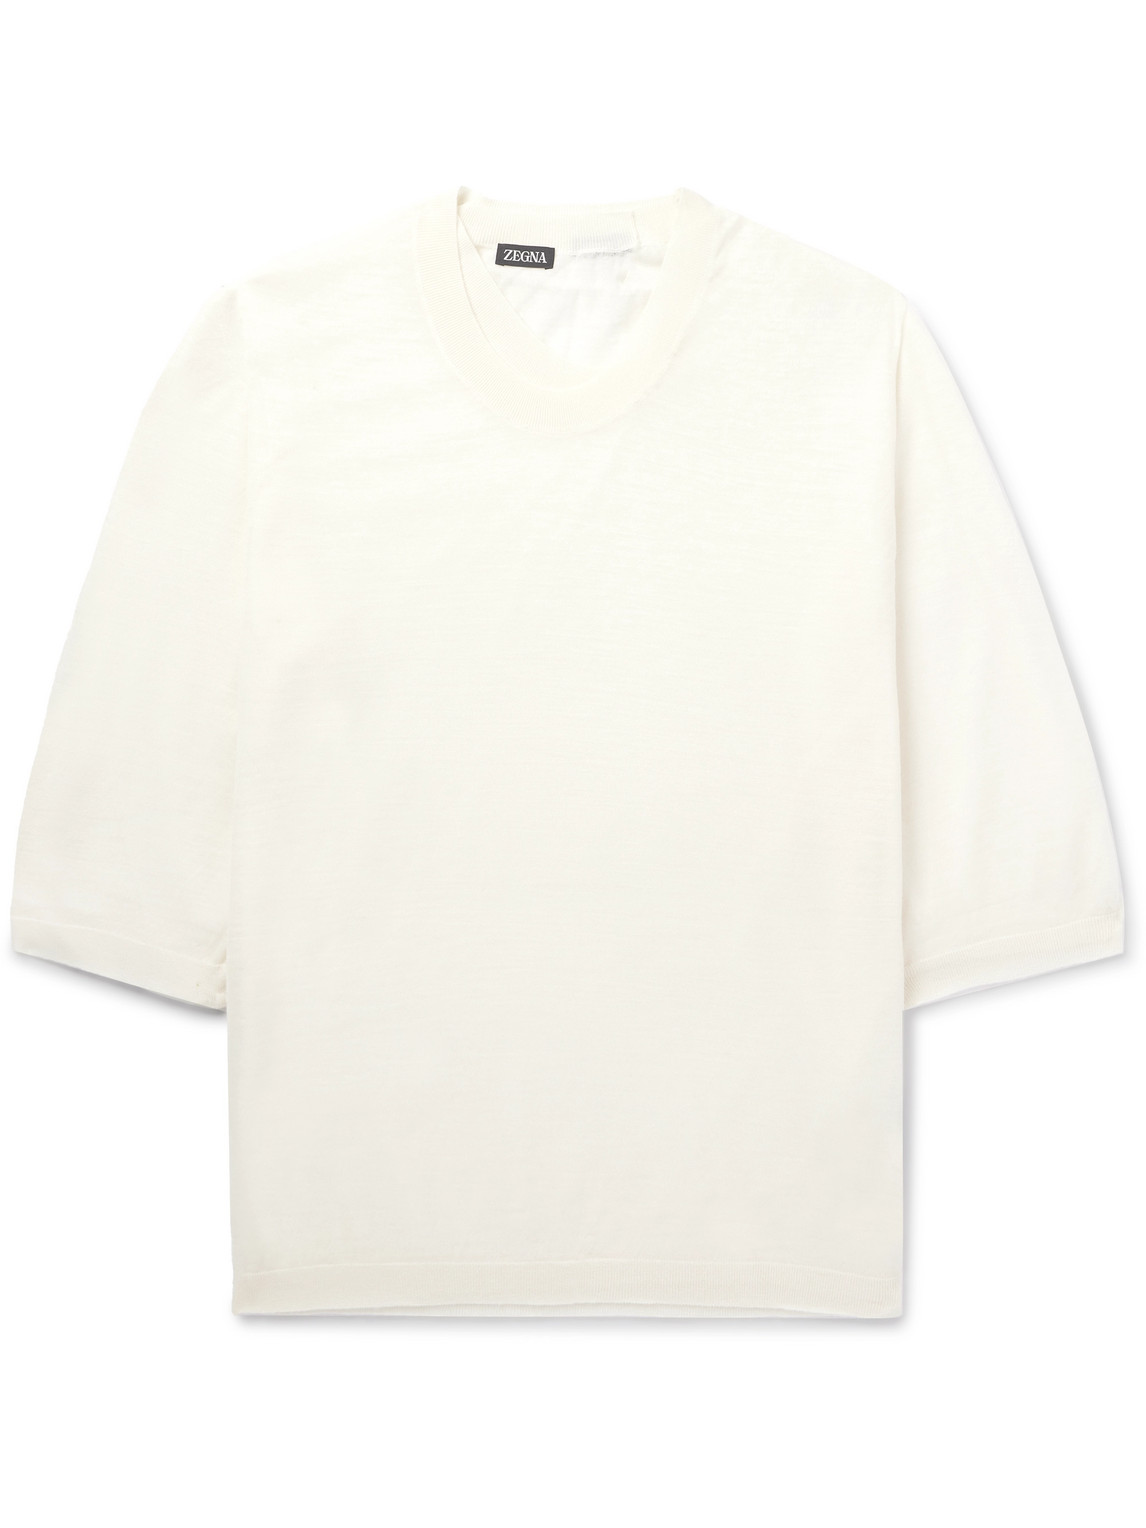 Zegna Calcare Layered Wool Sweater In White